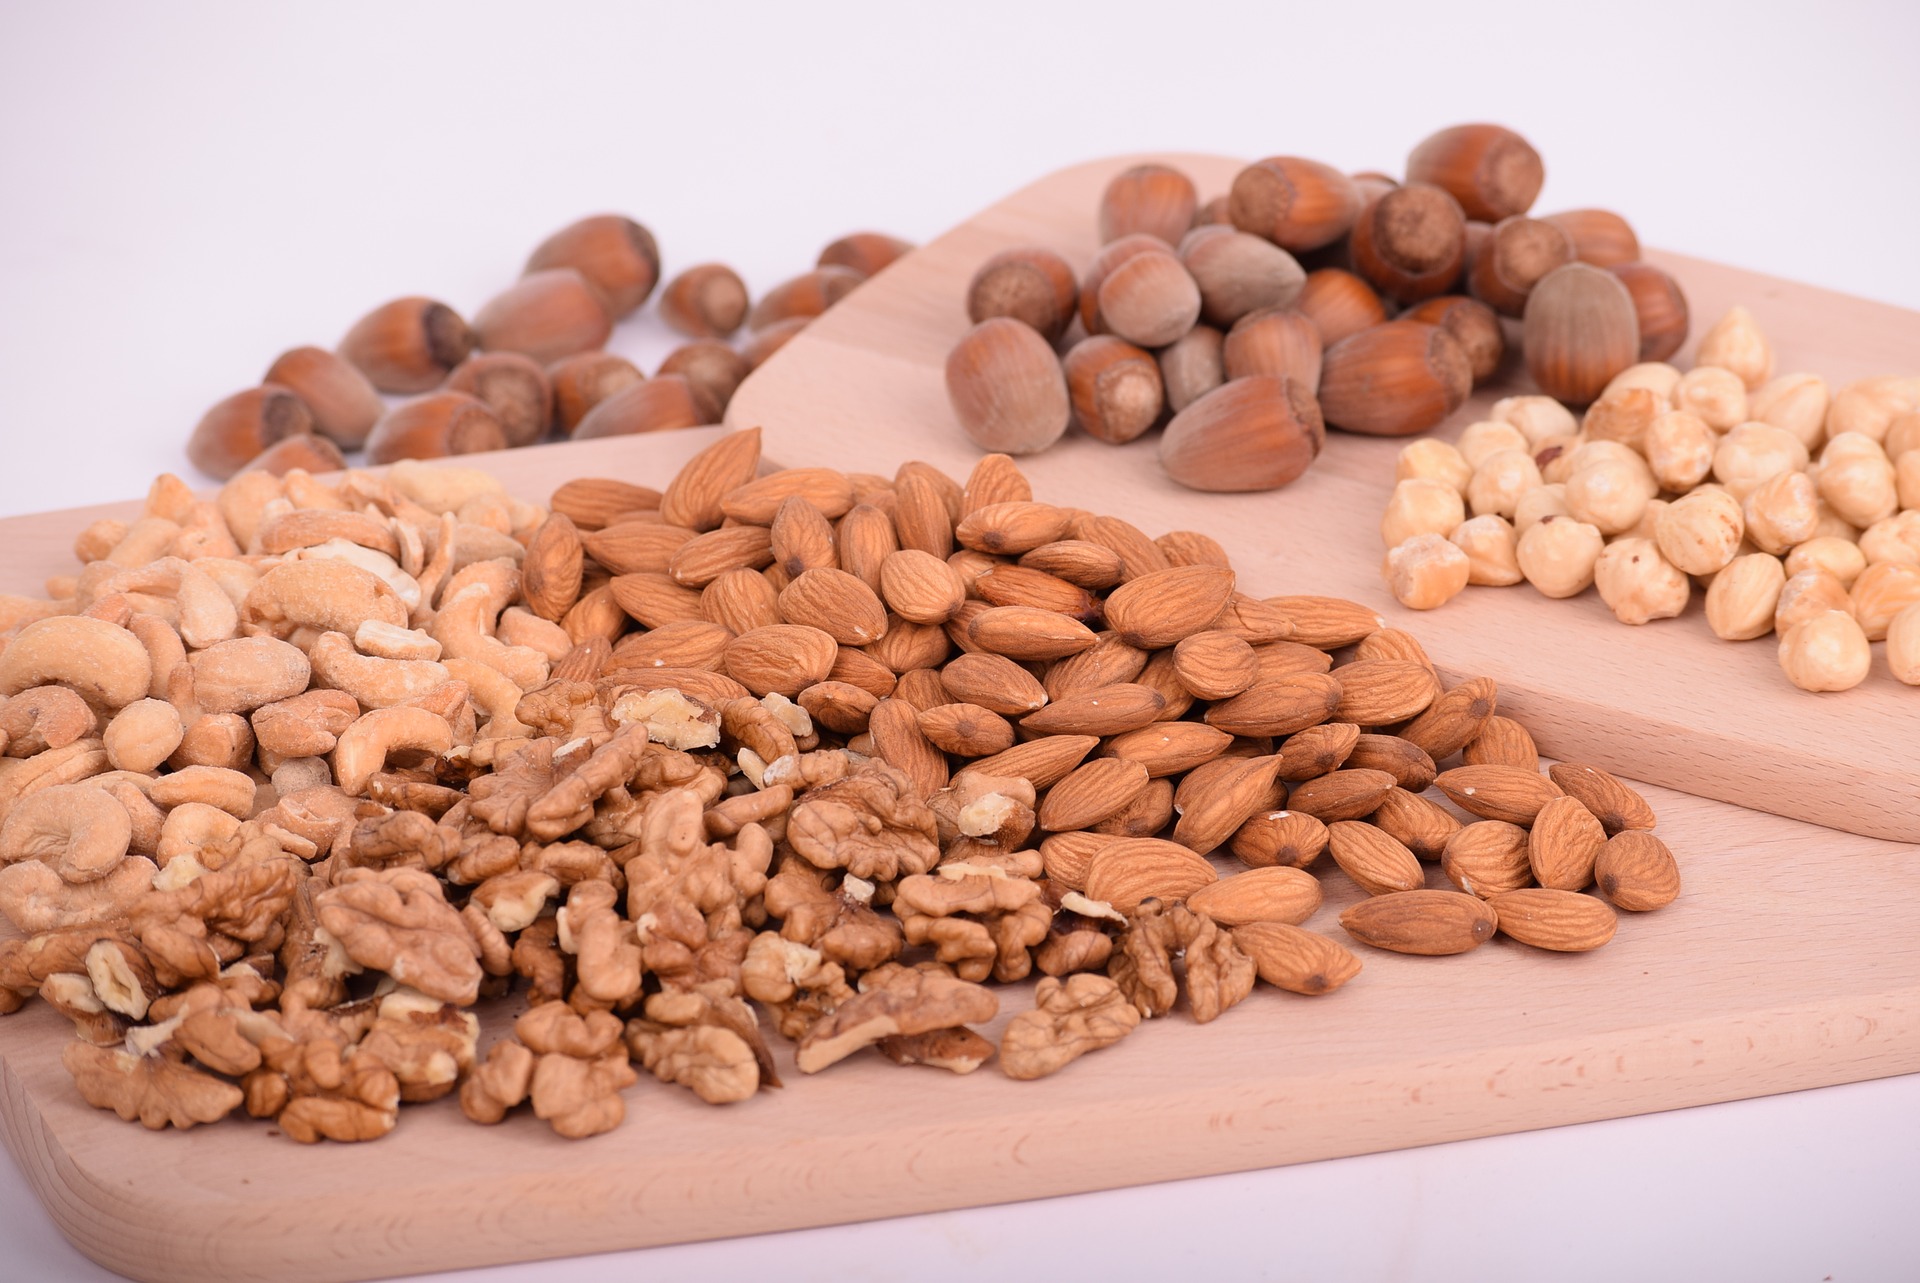 Protein-packed nuts